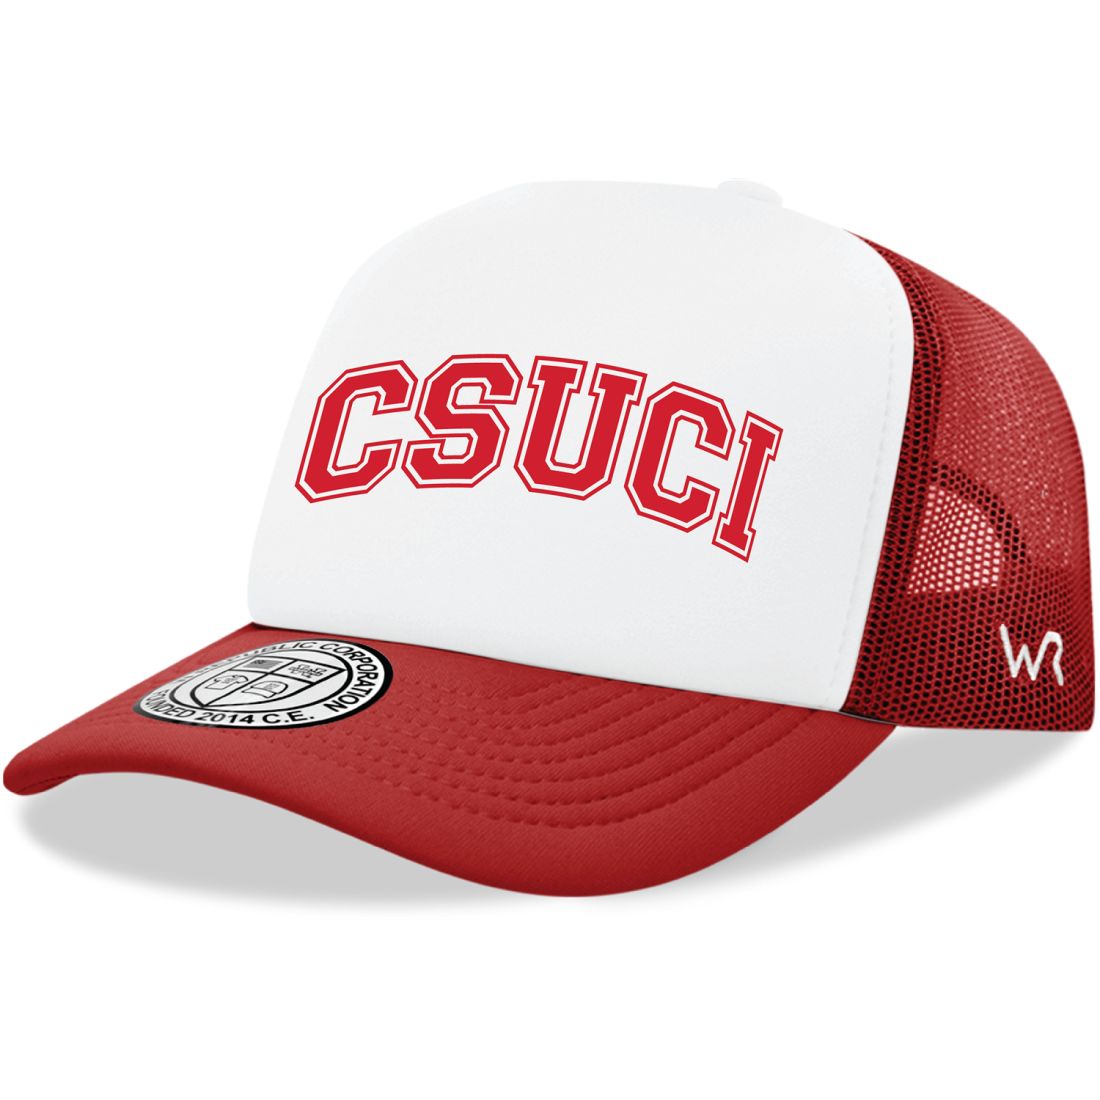 CSUCI California State University Channel Islands The Dolphins Practice Foam Trucker Hats